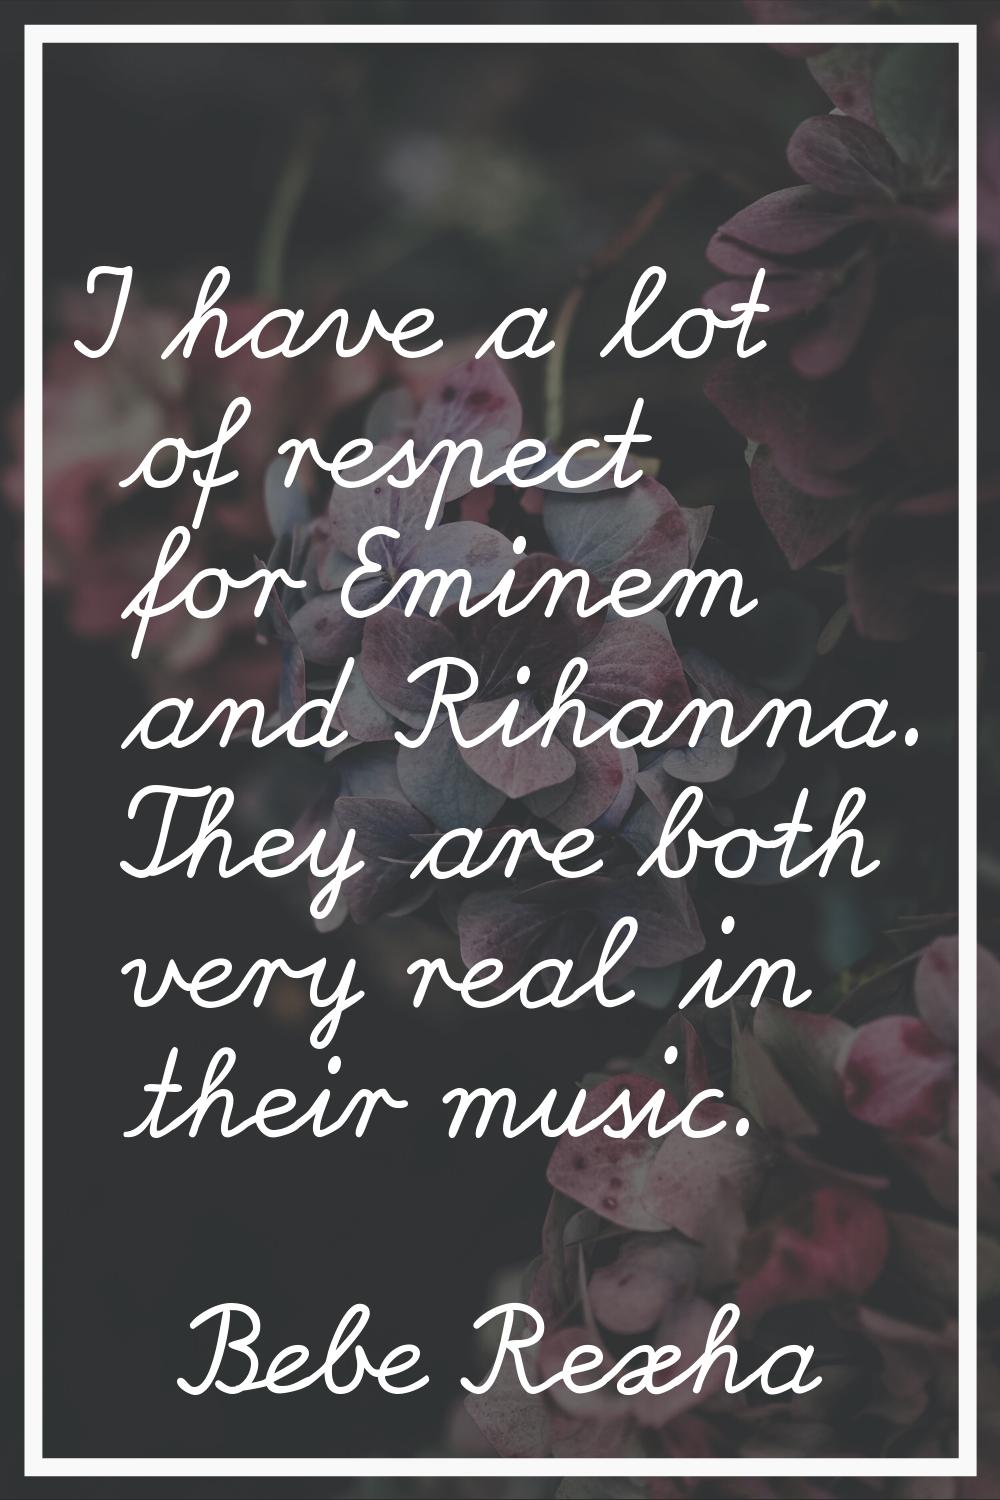 I have a lot of respect for Eminem and Rihanna. They are both very real in their music.